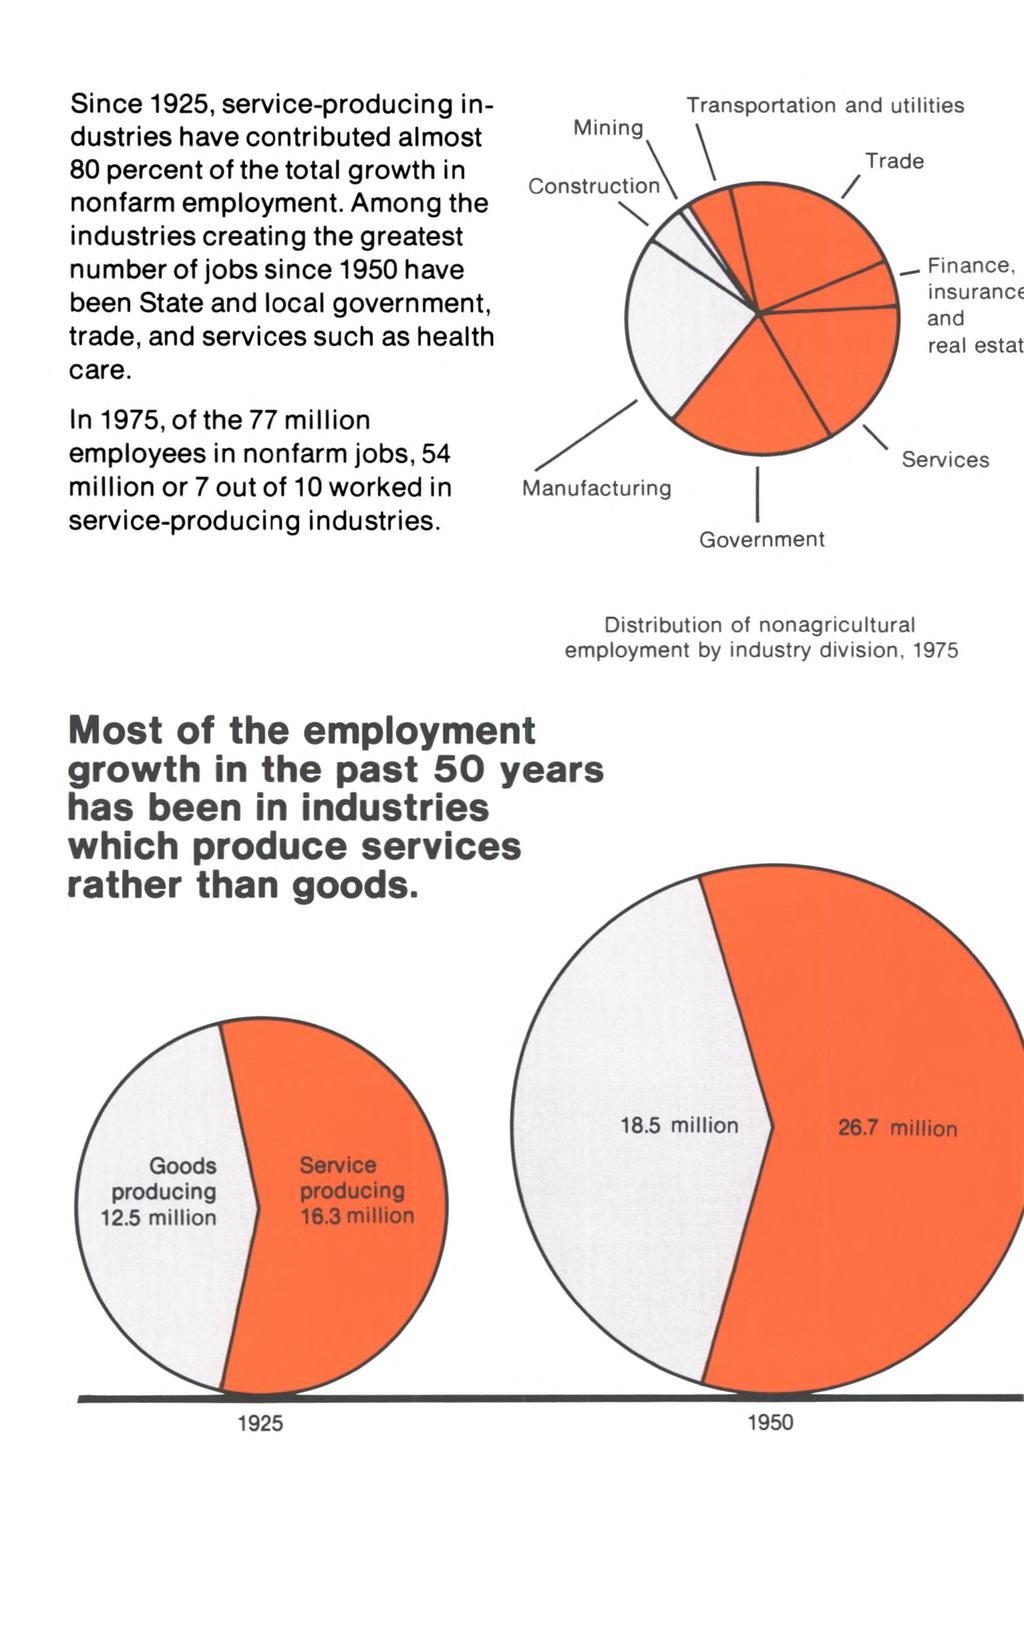 Since 1925, service-producing industries have contributed almost 80 percent of the total growth in nonfarm employment.